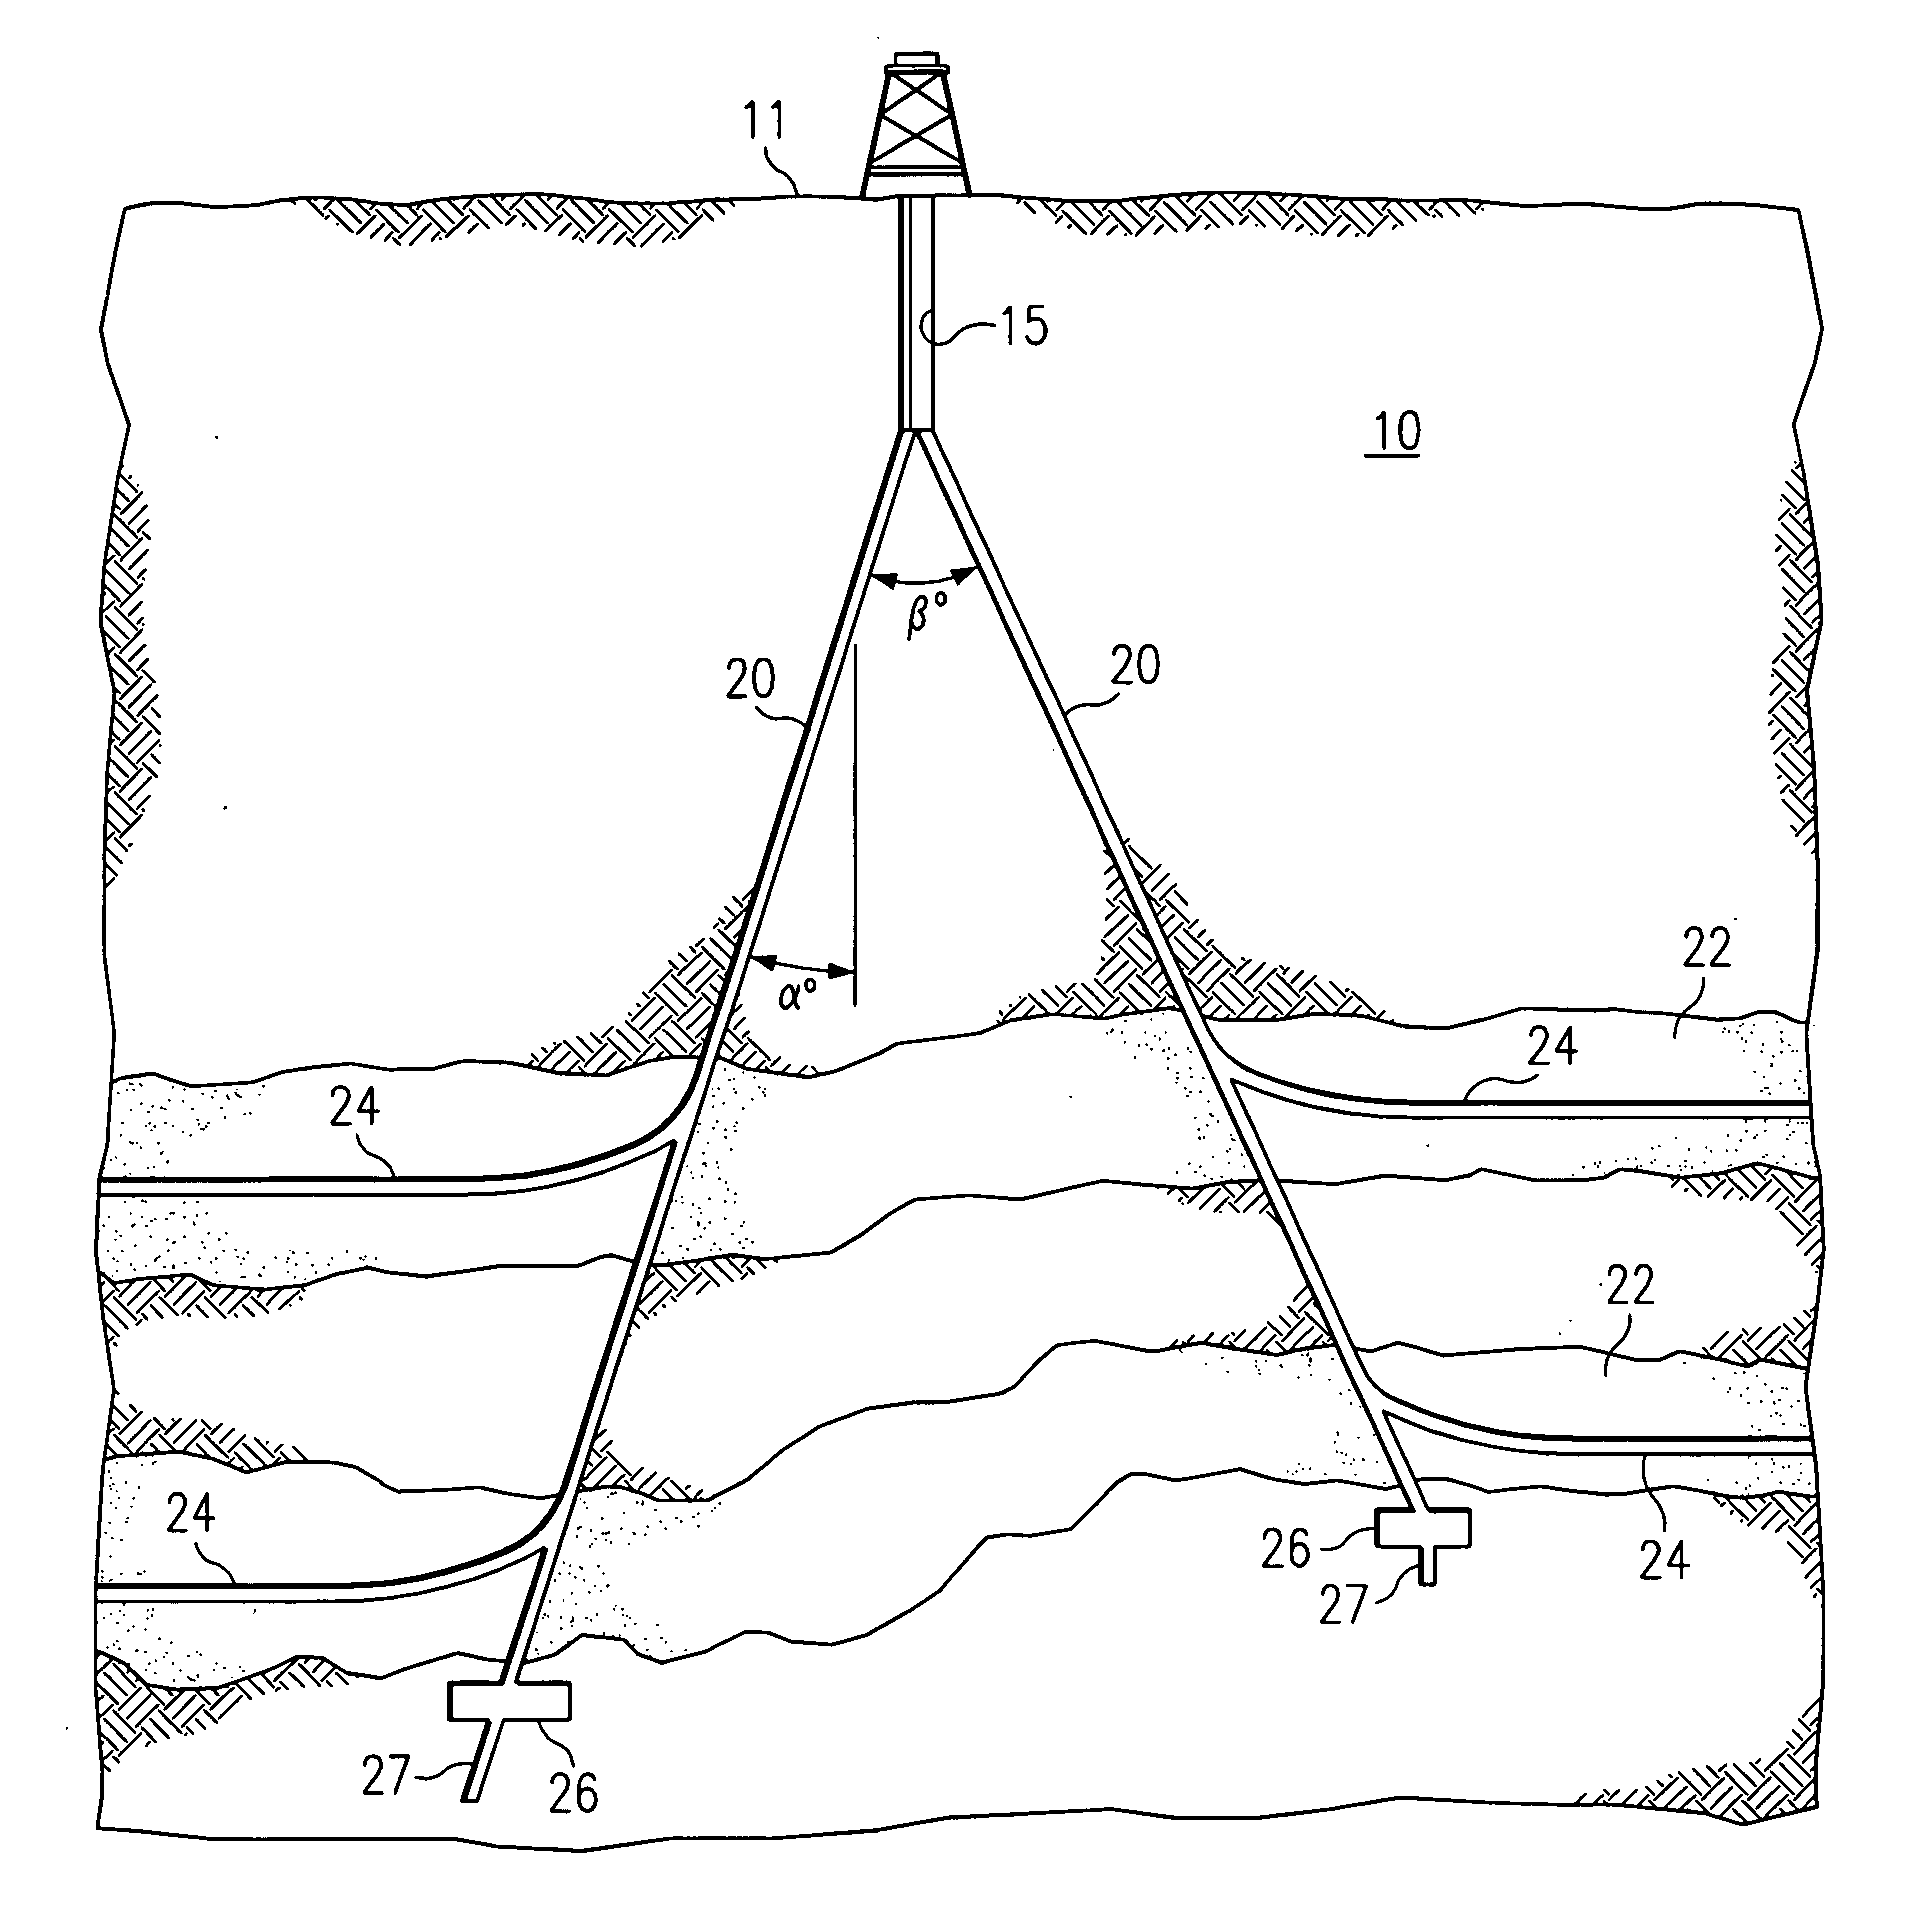 Slant entry well system and method